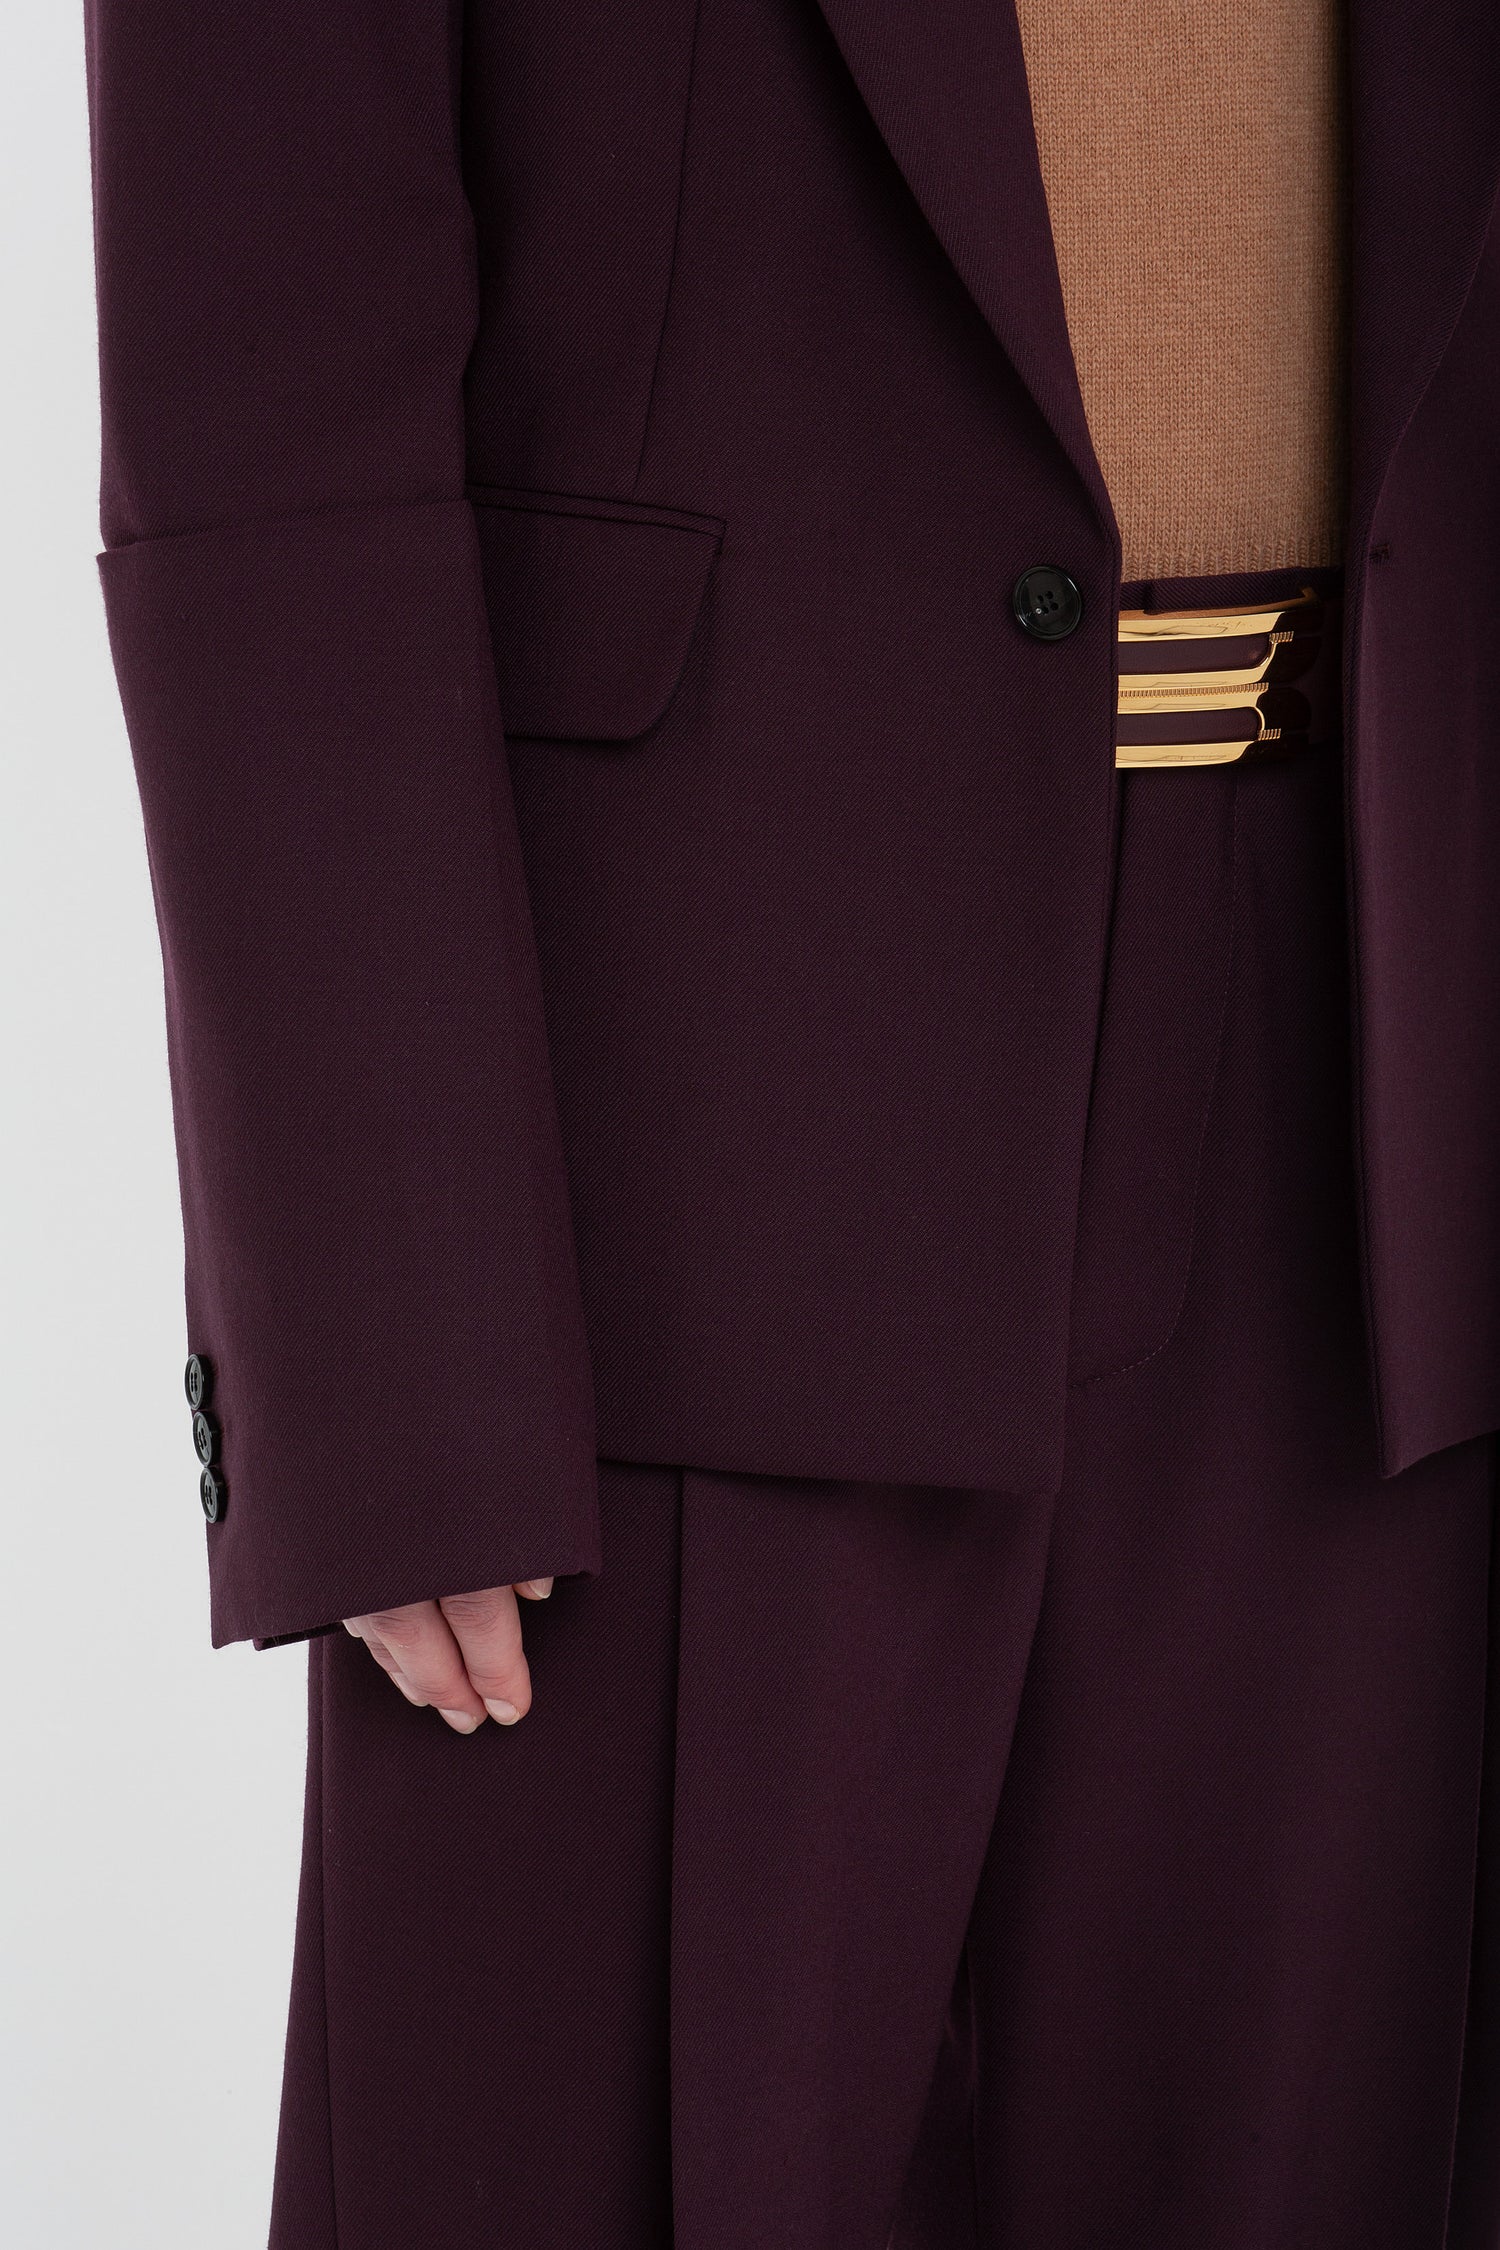 Close-up of a person wearing a dark purple, single-breasted blazer and matching pants with a peach-colored shirt. The Sleeve Detail Patch Pocket Jacket In Deep Mahogany by Victoria Beckham, made from recycled wool, has long sleeves, and there is a gold-colored belt buckle visible.